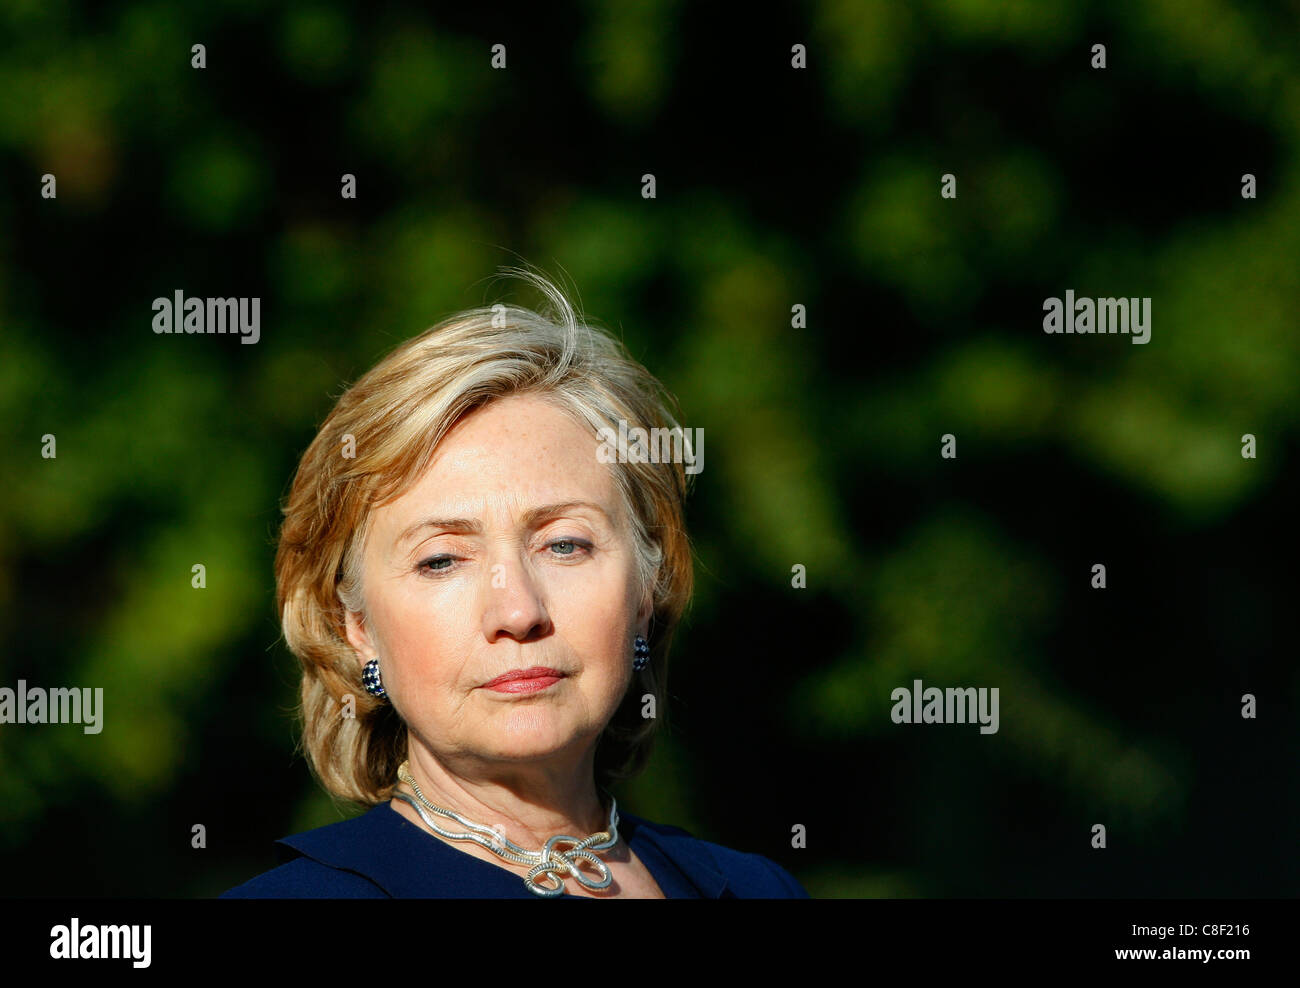 United States Secretary of State Hillary Clinton during her visit to Ireland Stock Photo